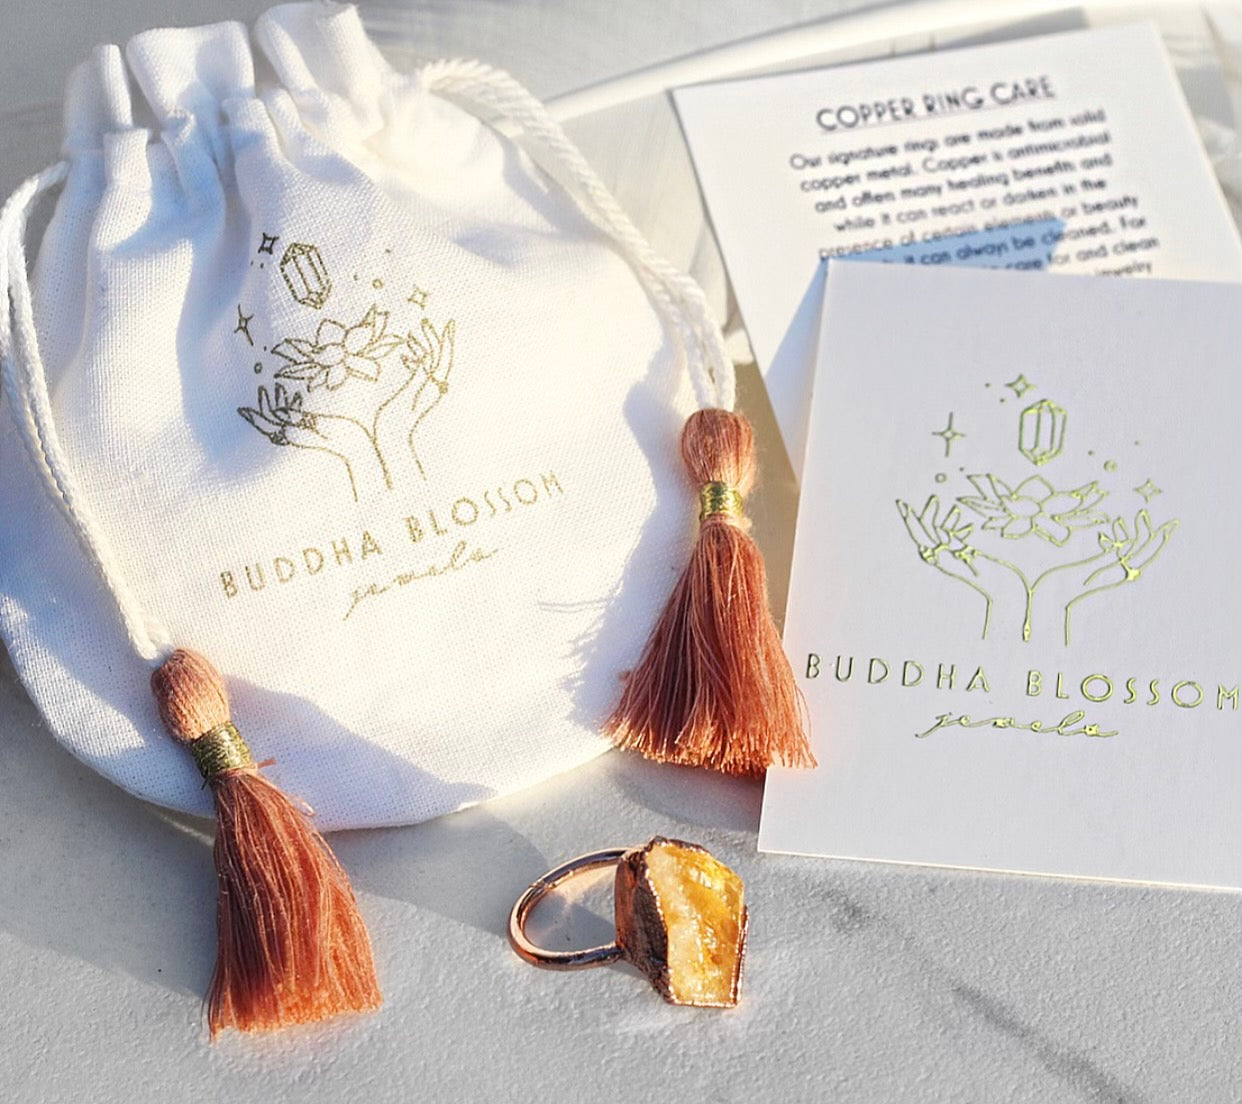 Buddha Blossom Jewels Gift Bag and Ring Care Card